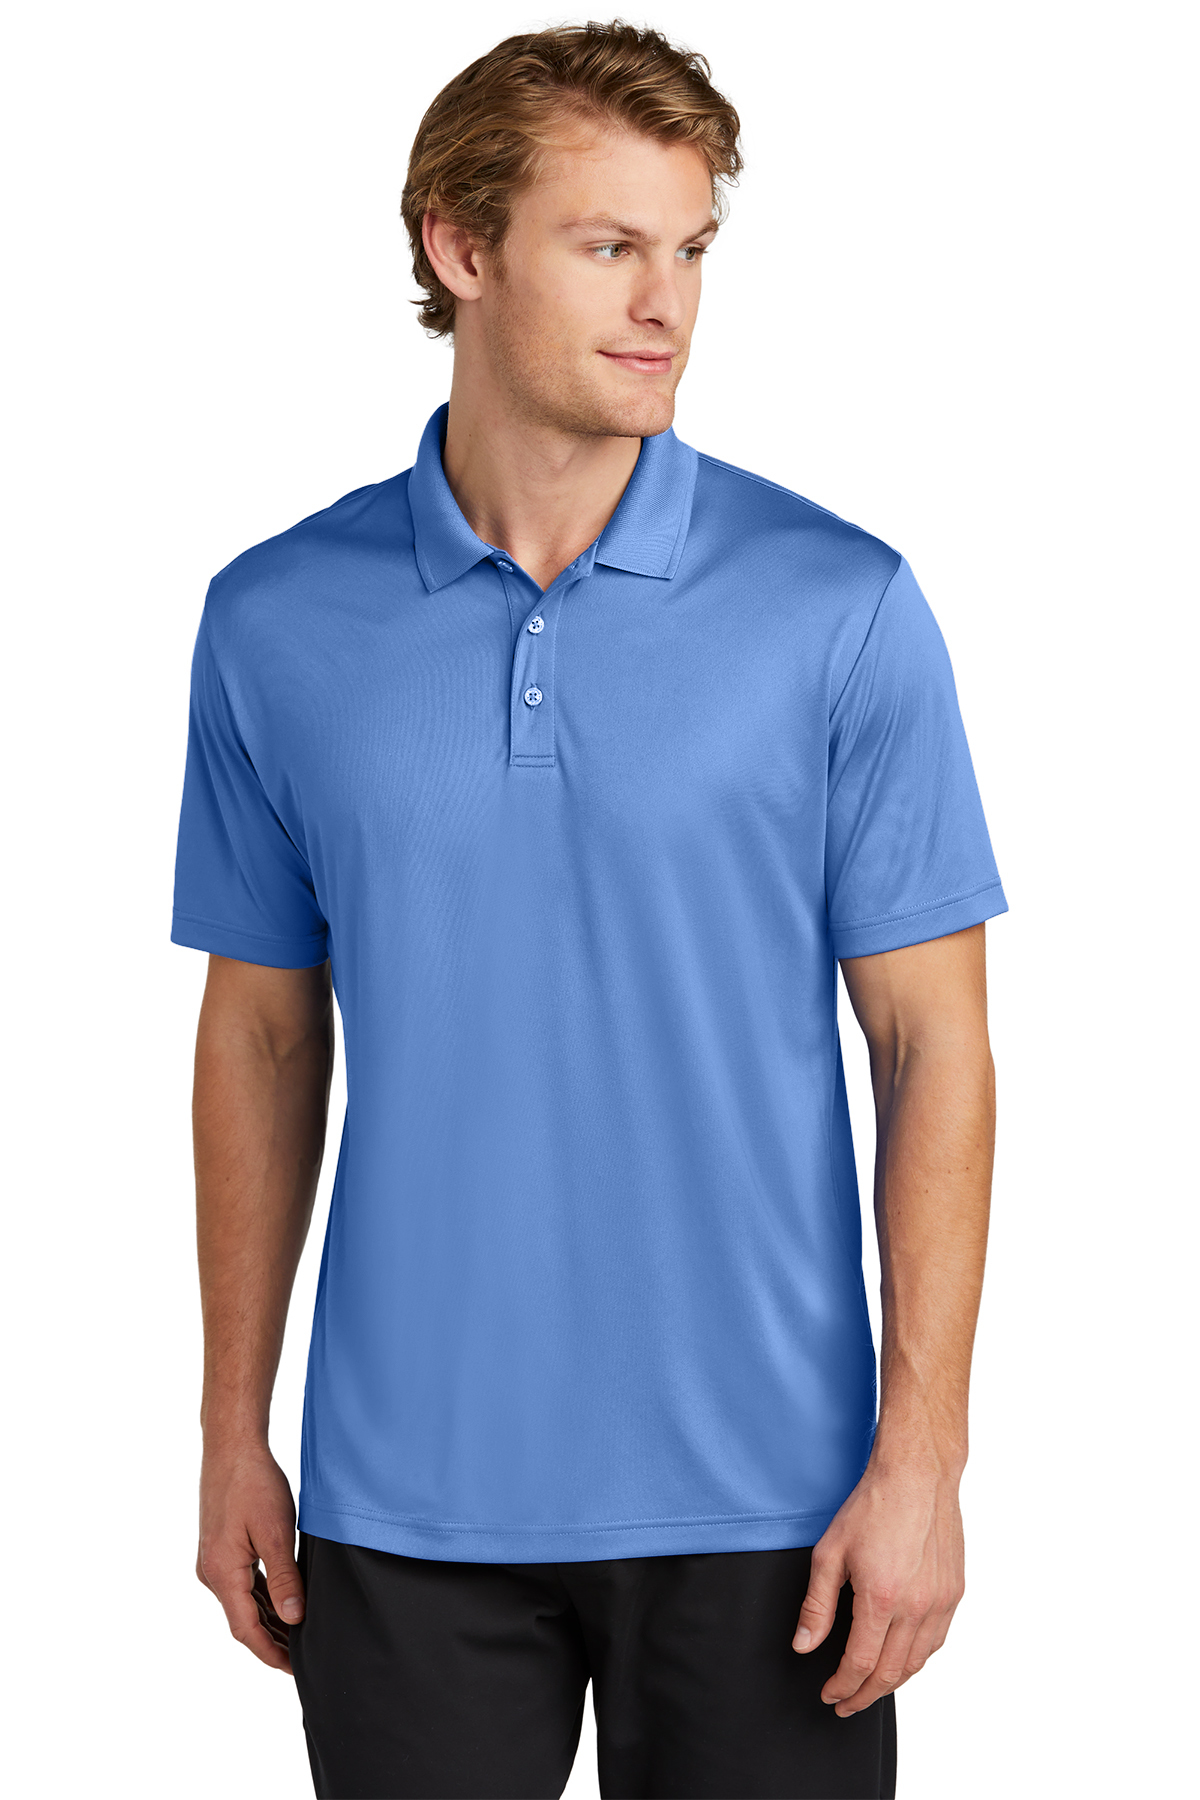 Ladies PosiCharge Re-Compete Polo Shirt